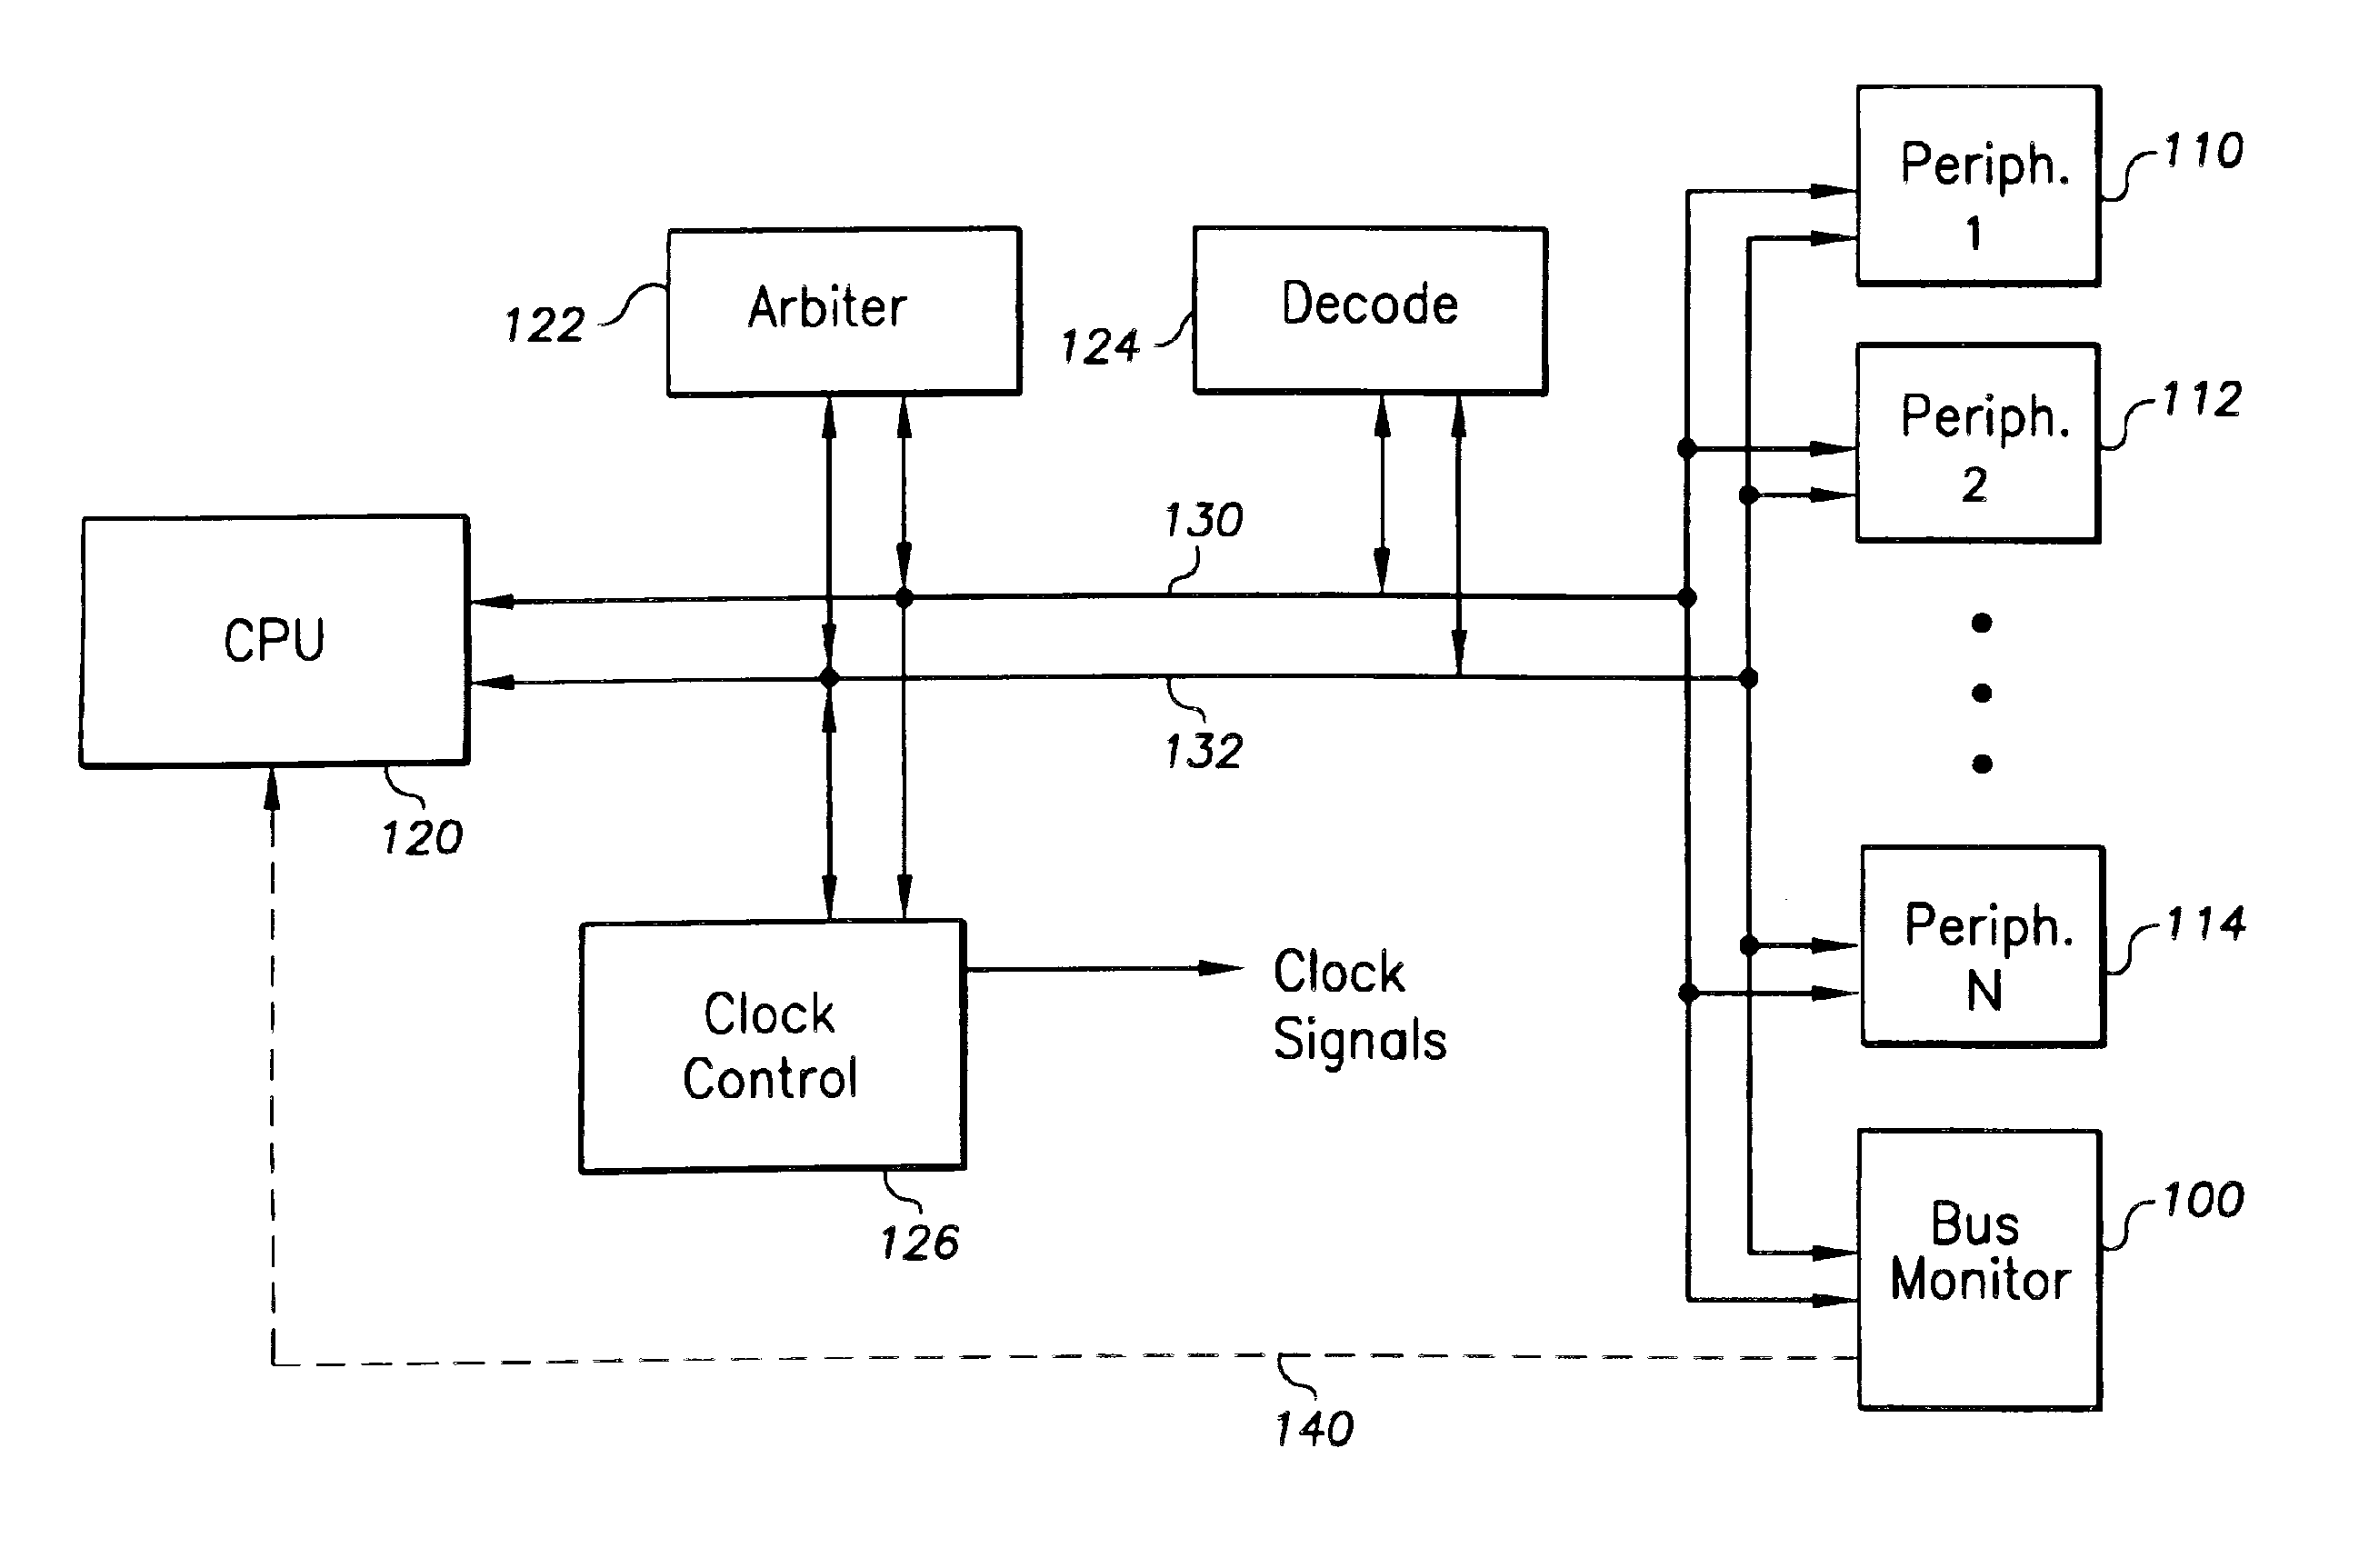 System for bus monitoring using a reconfigurable bus monitor which is adapted to report back to CPU in response to detecting certain selected events